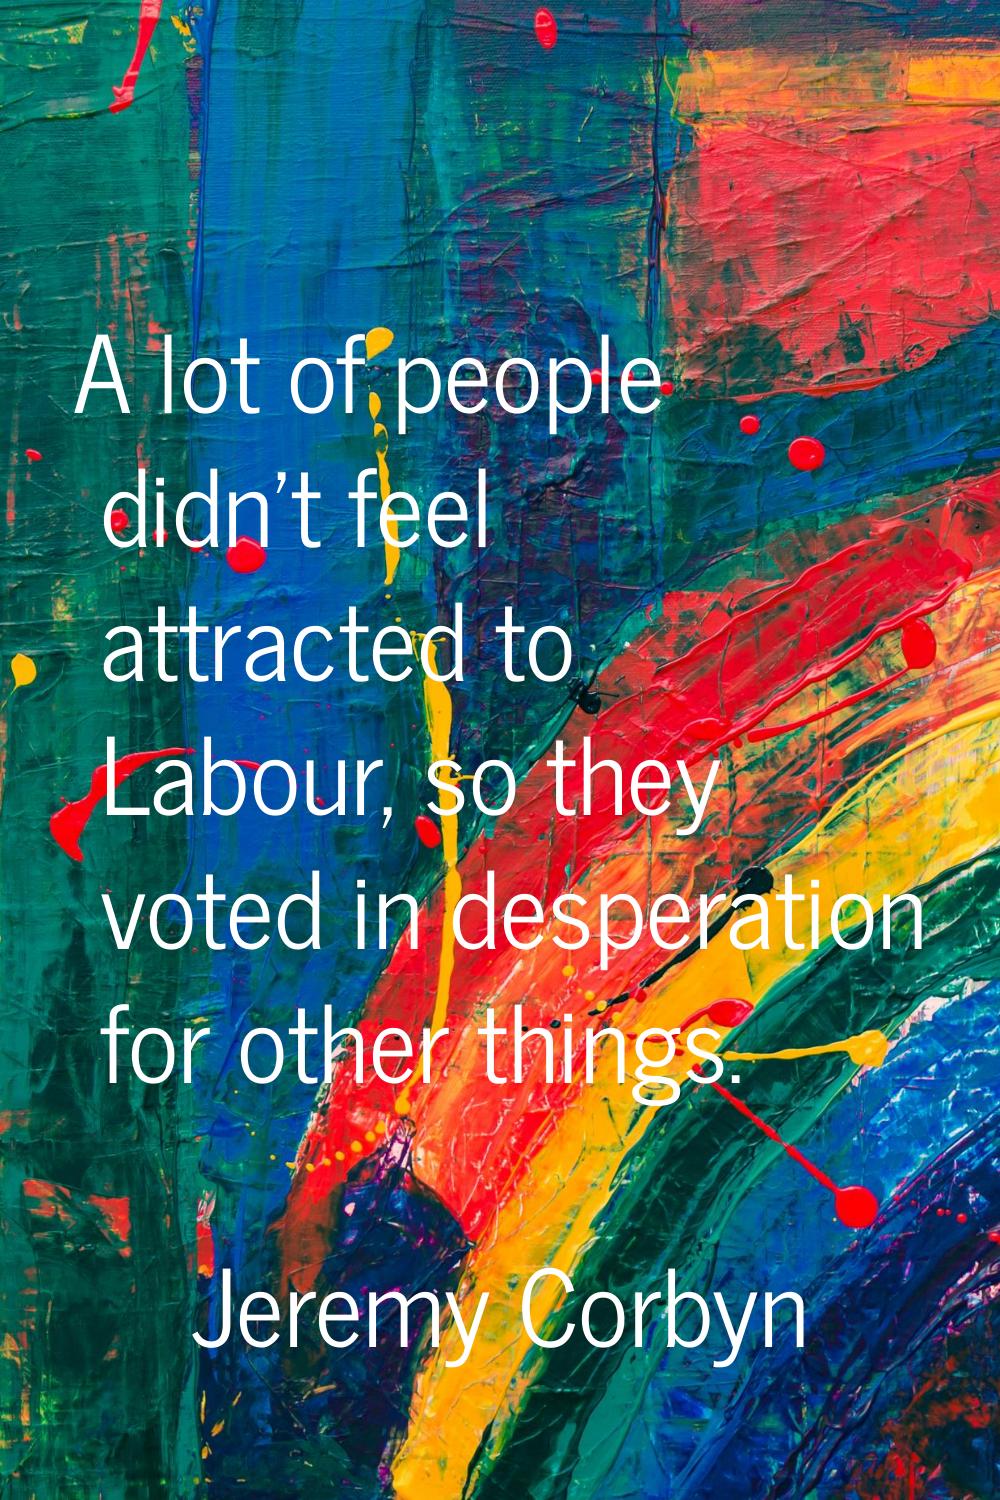 A lot of people didn't feel attracted to Labour, so they voted in desperation for other things.